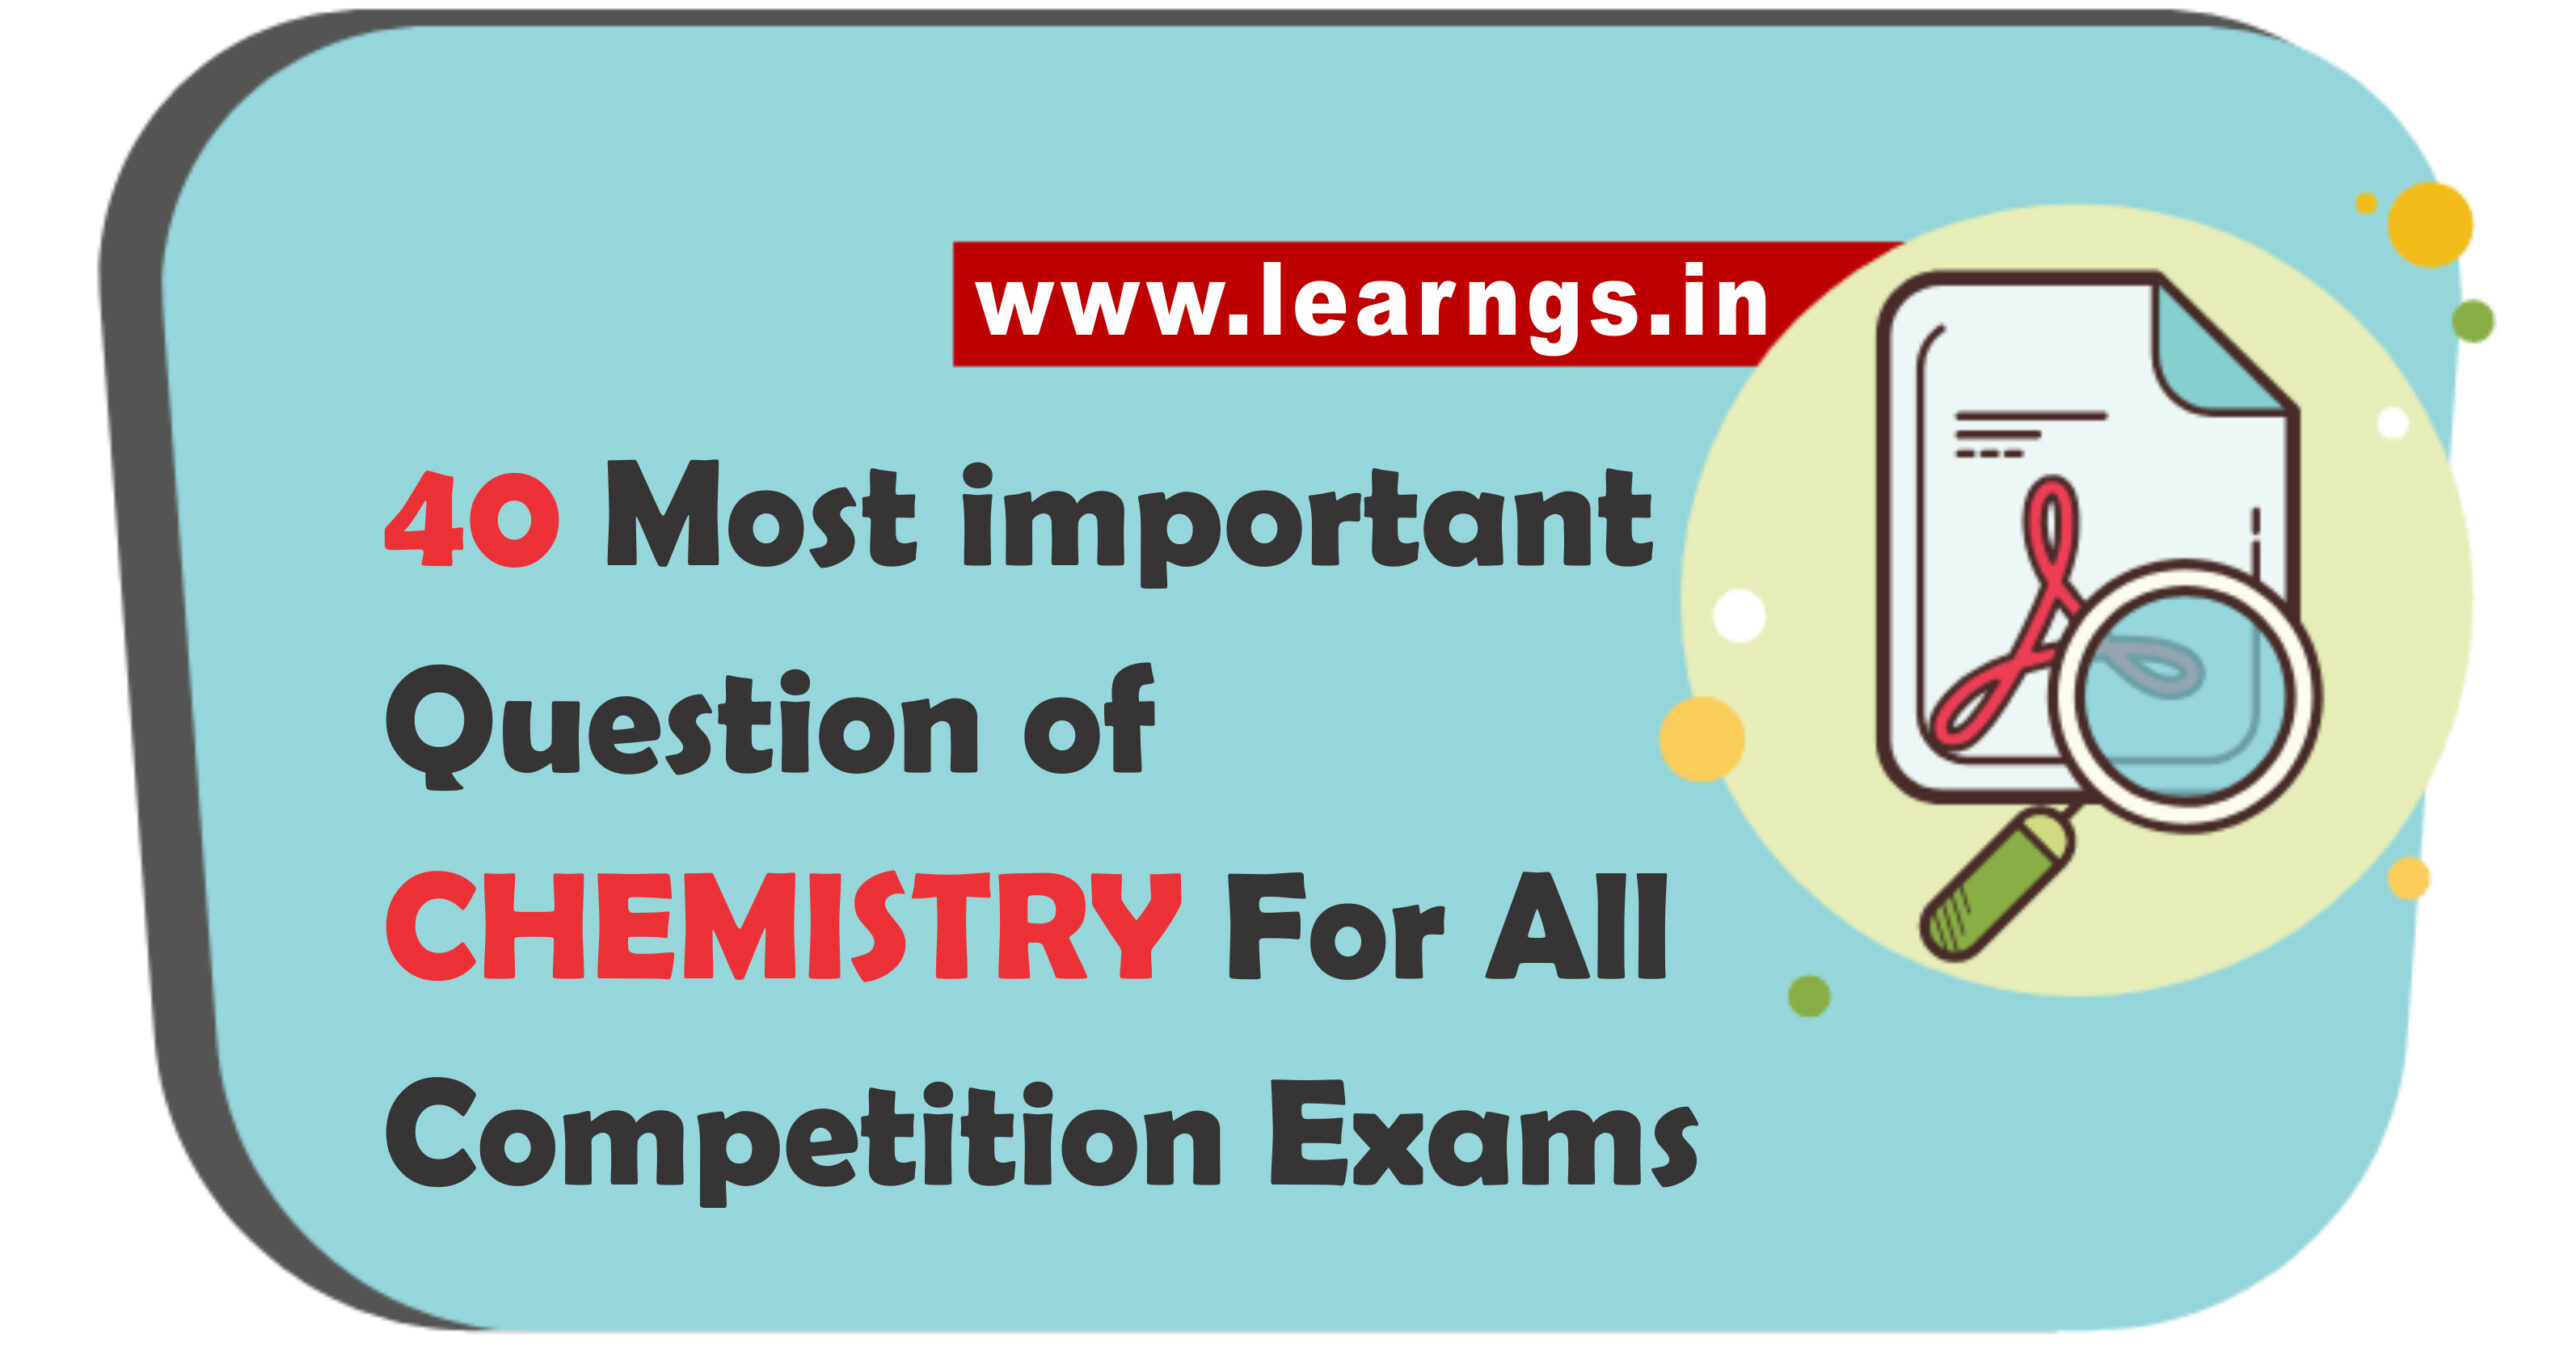 40 Most Important Questions Chemistry For All Competition Exams